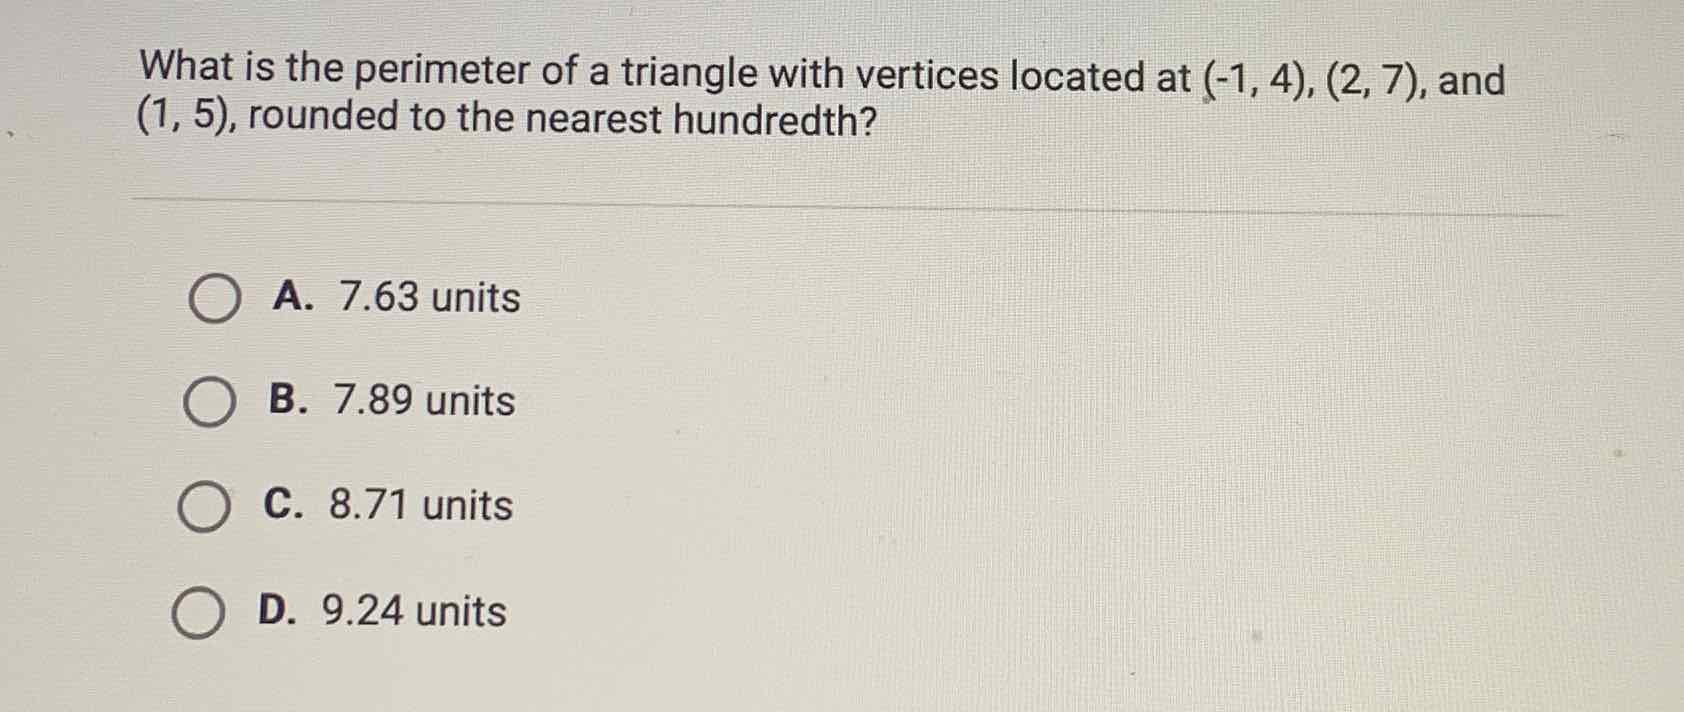 What is the perimeter of a triangle with vertices located at \( (-1,4),(2,7) \), and \( (1,5) \), rounded to the nearest hundredth?
A. \( 7.63 \) units
B. \( 7.89 \) units
C. \( 8.71 \) units
D. \( 9.24 \) units